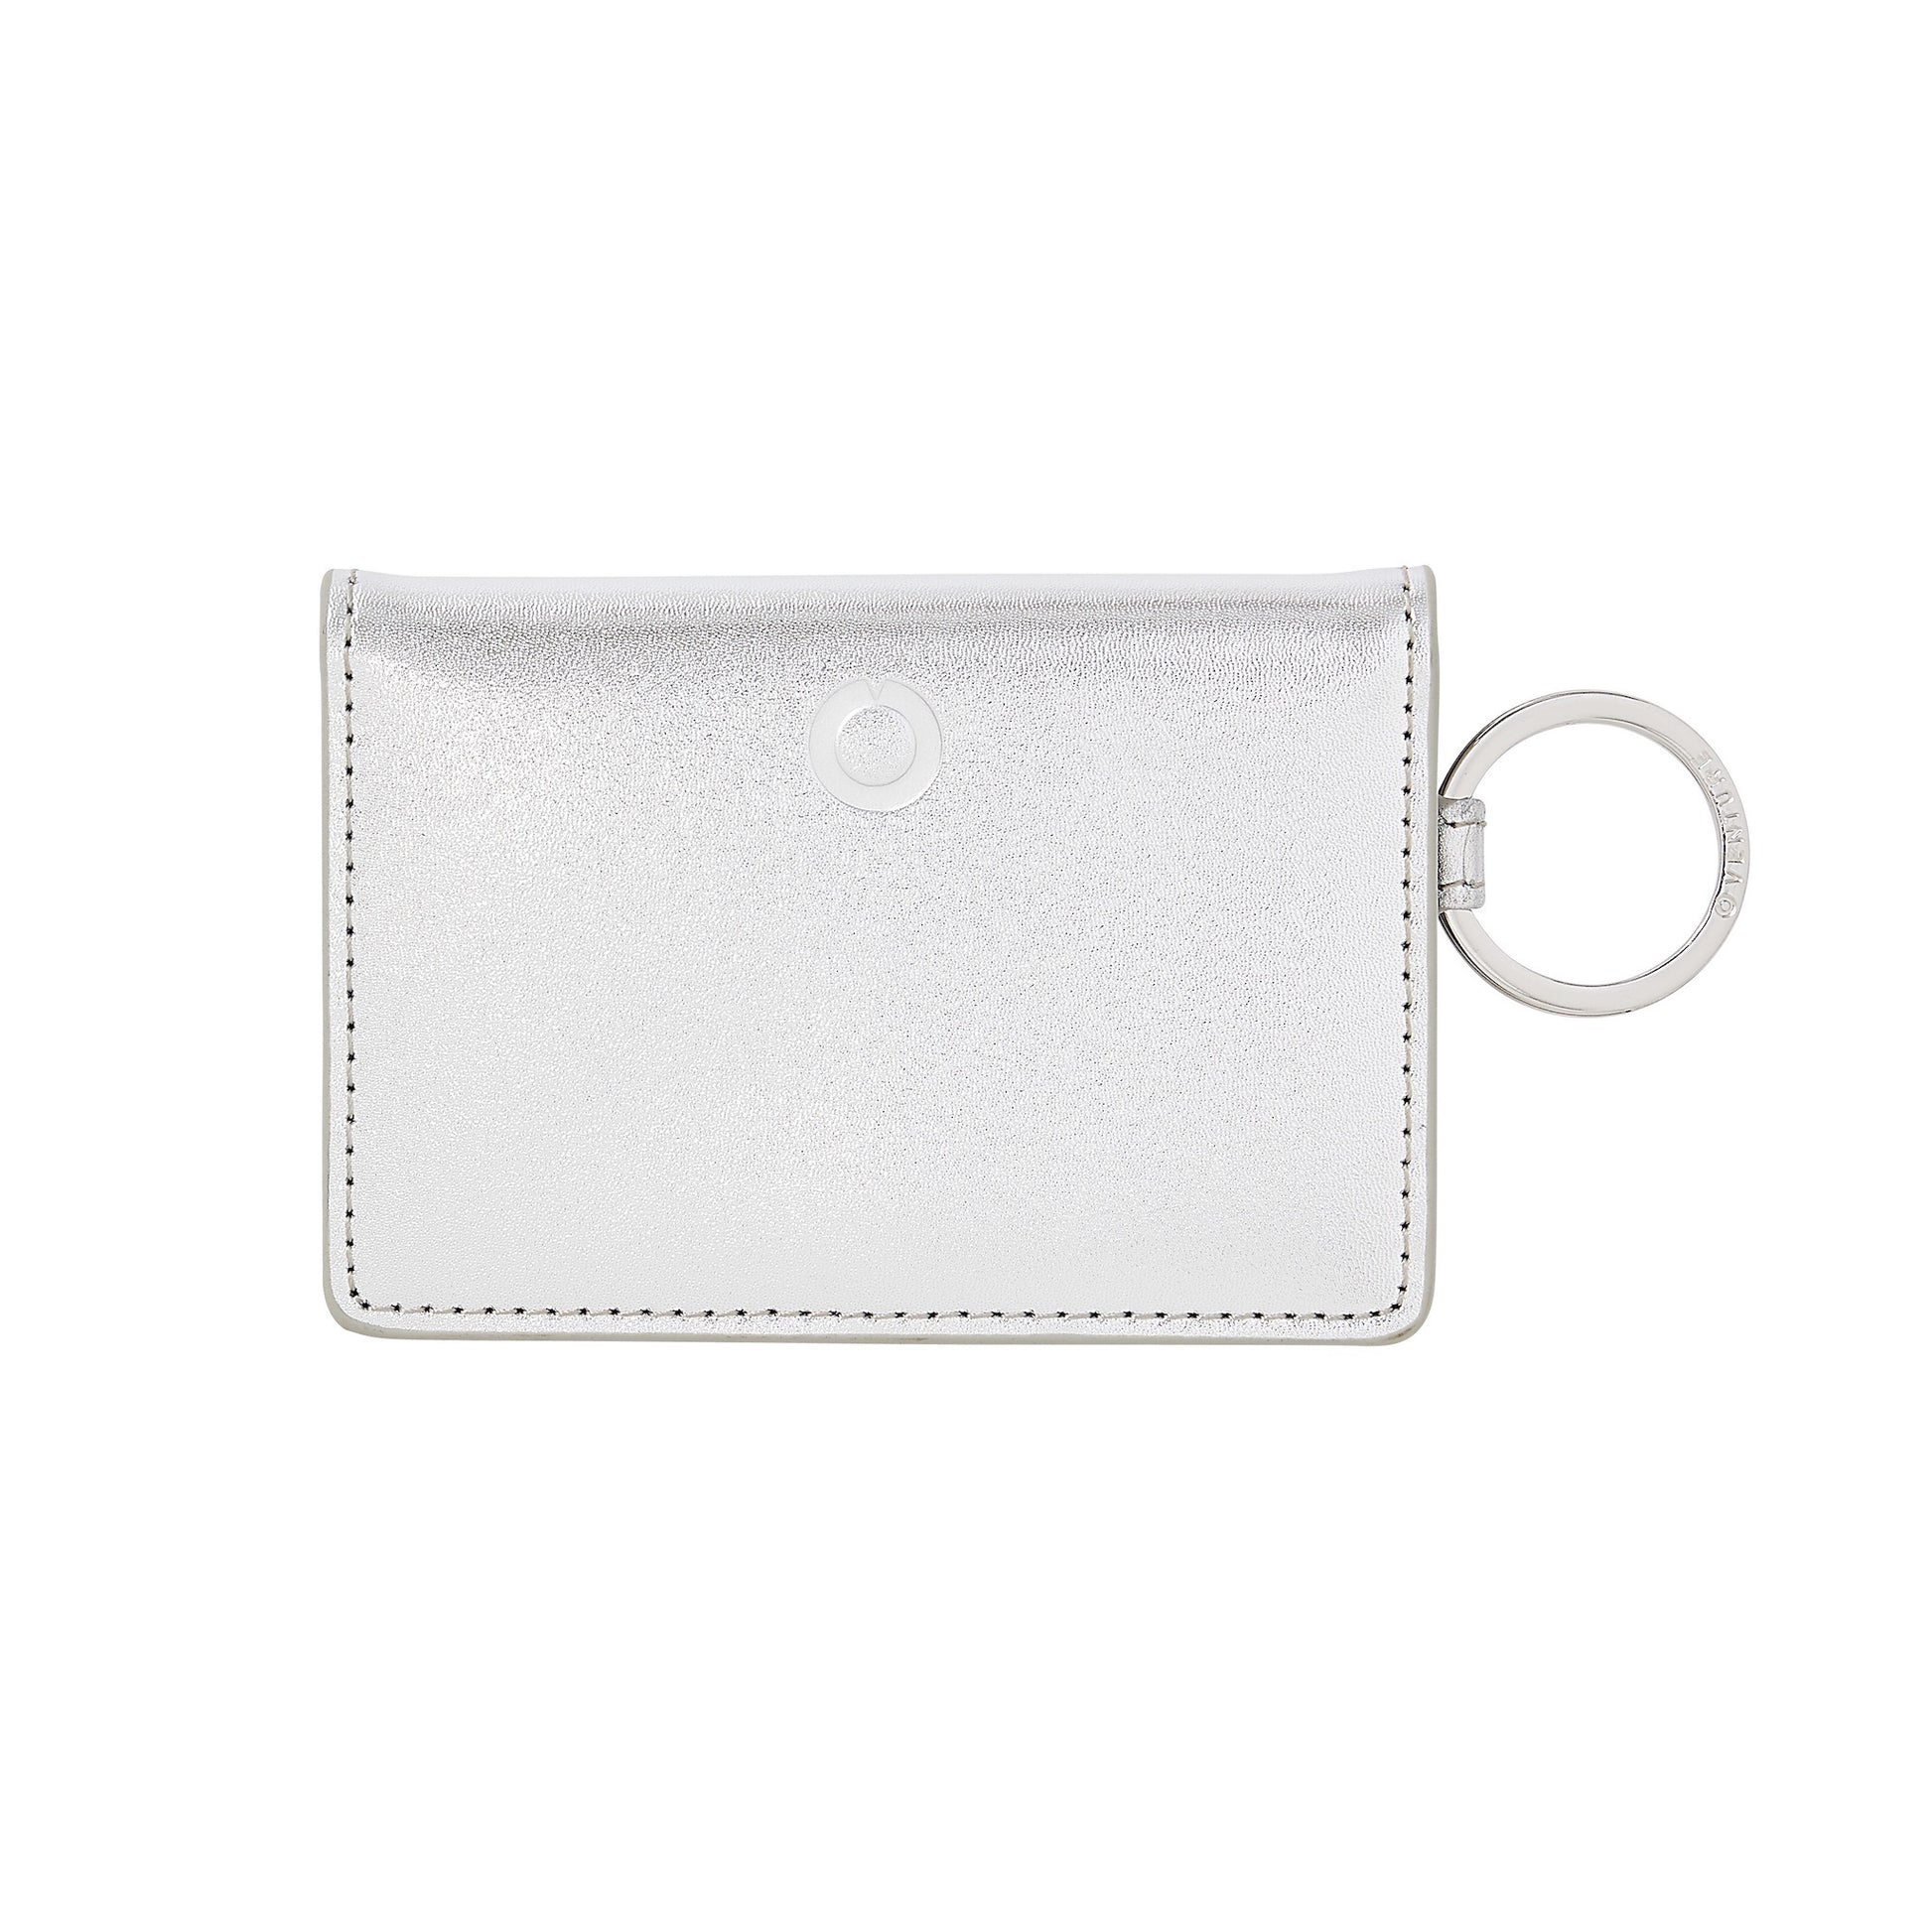 Silver leather bifold keychain wallet with compartments in silver leather.